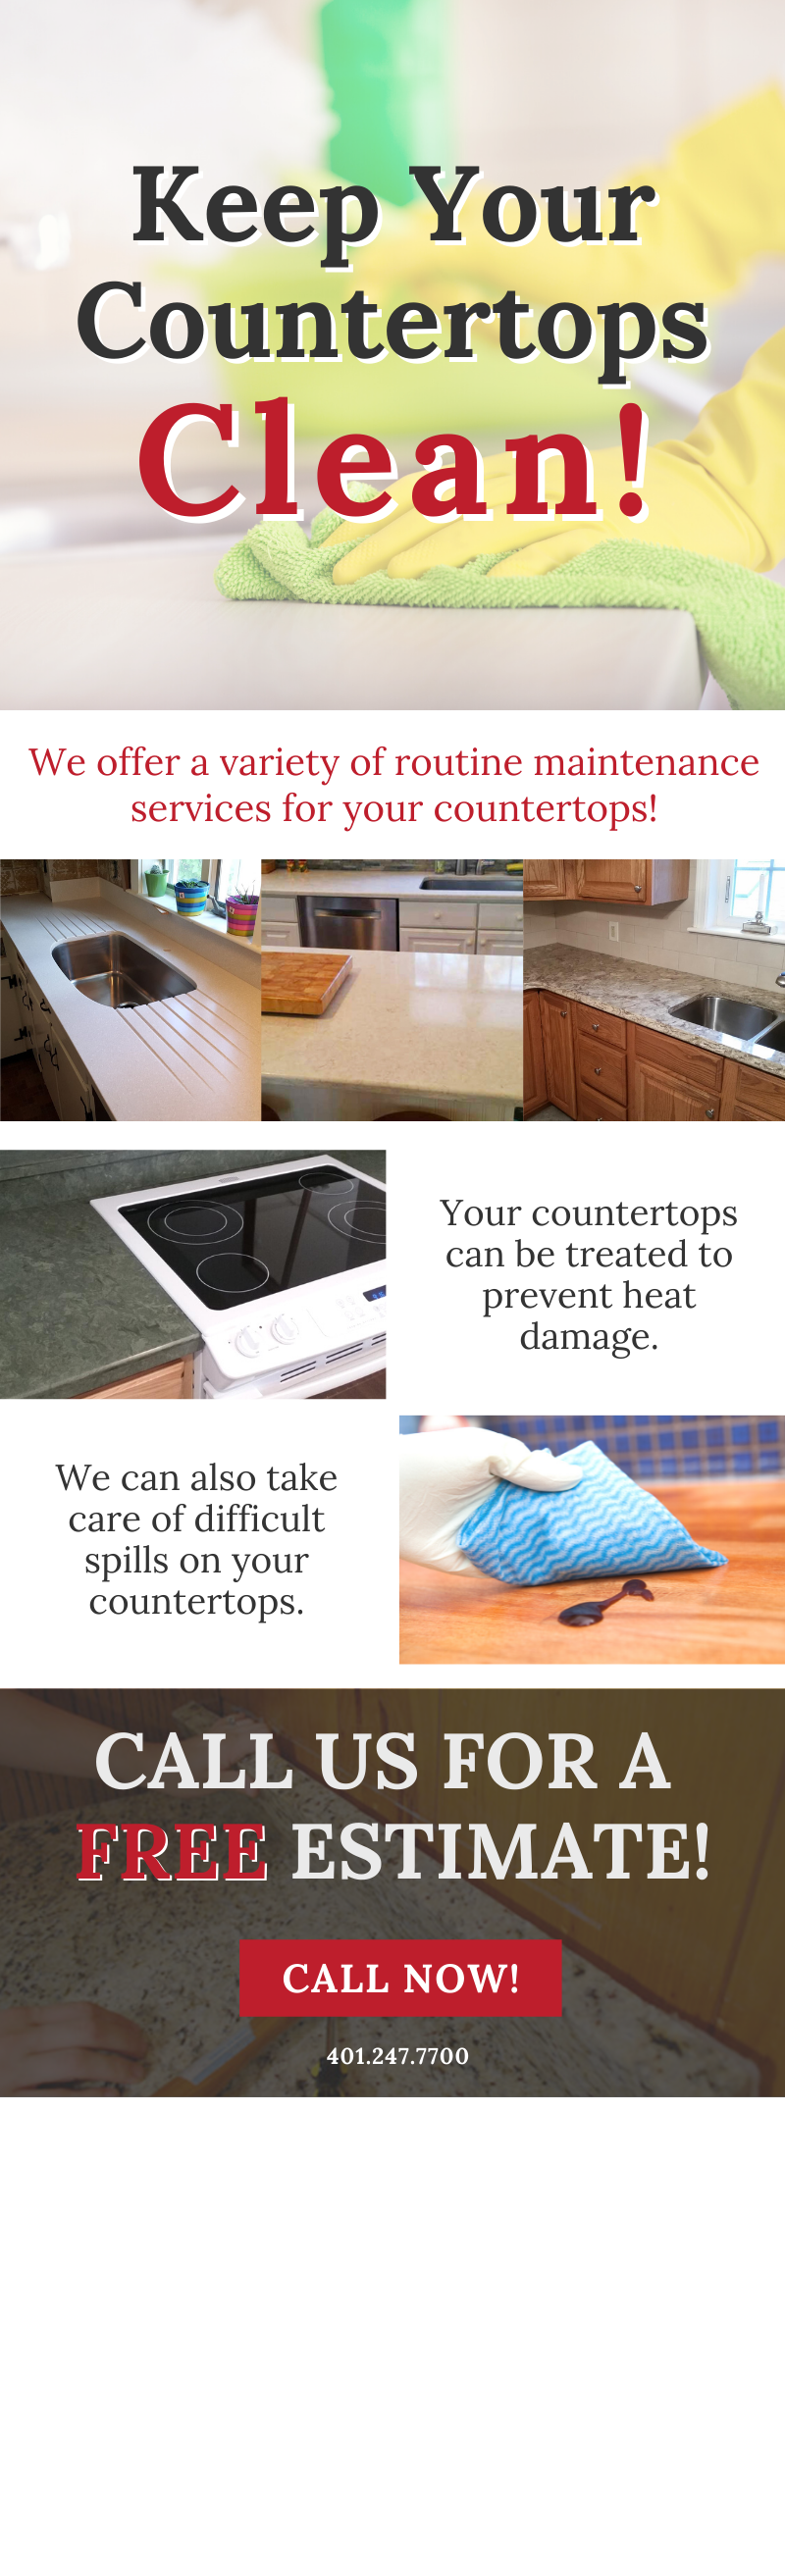 Keep Your Countertops Clean! 3